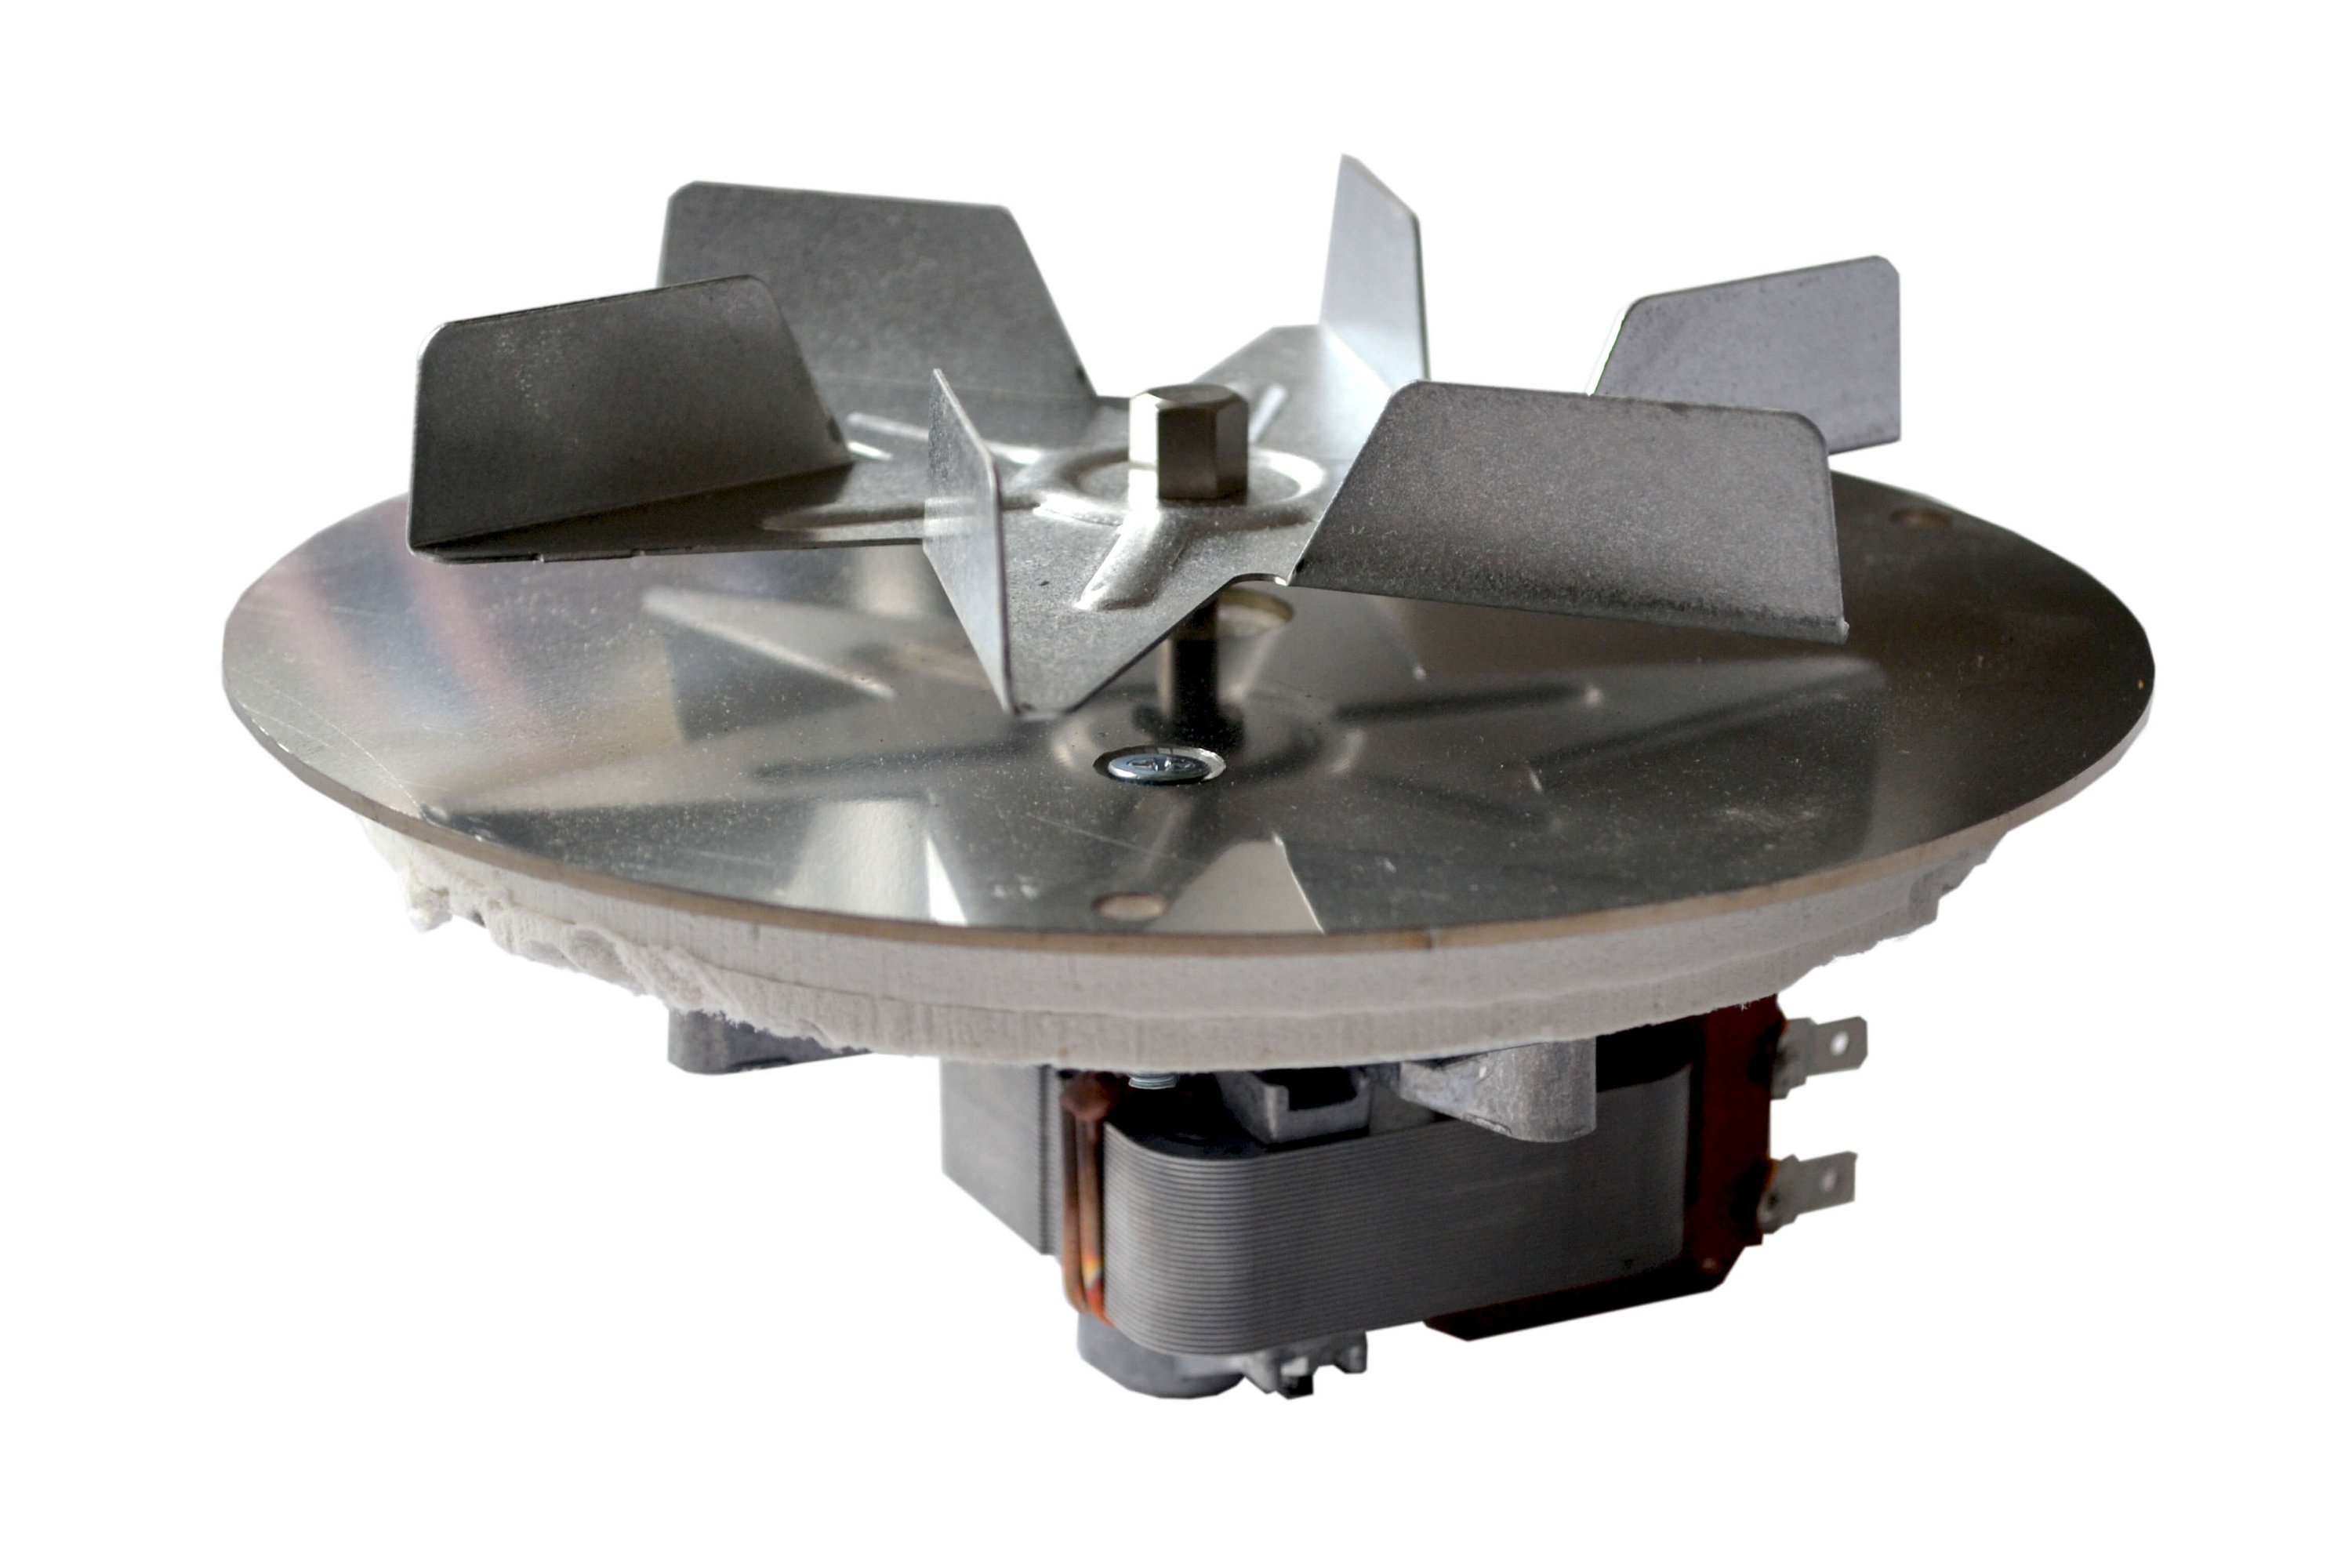 Fontana spare part: fan for pizza ovens